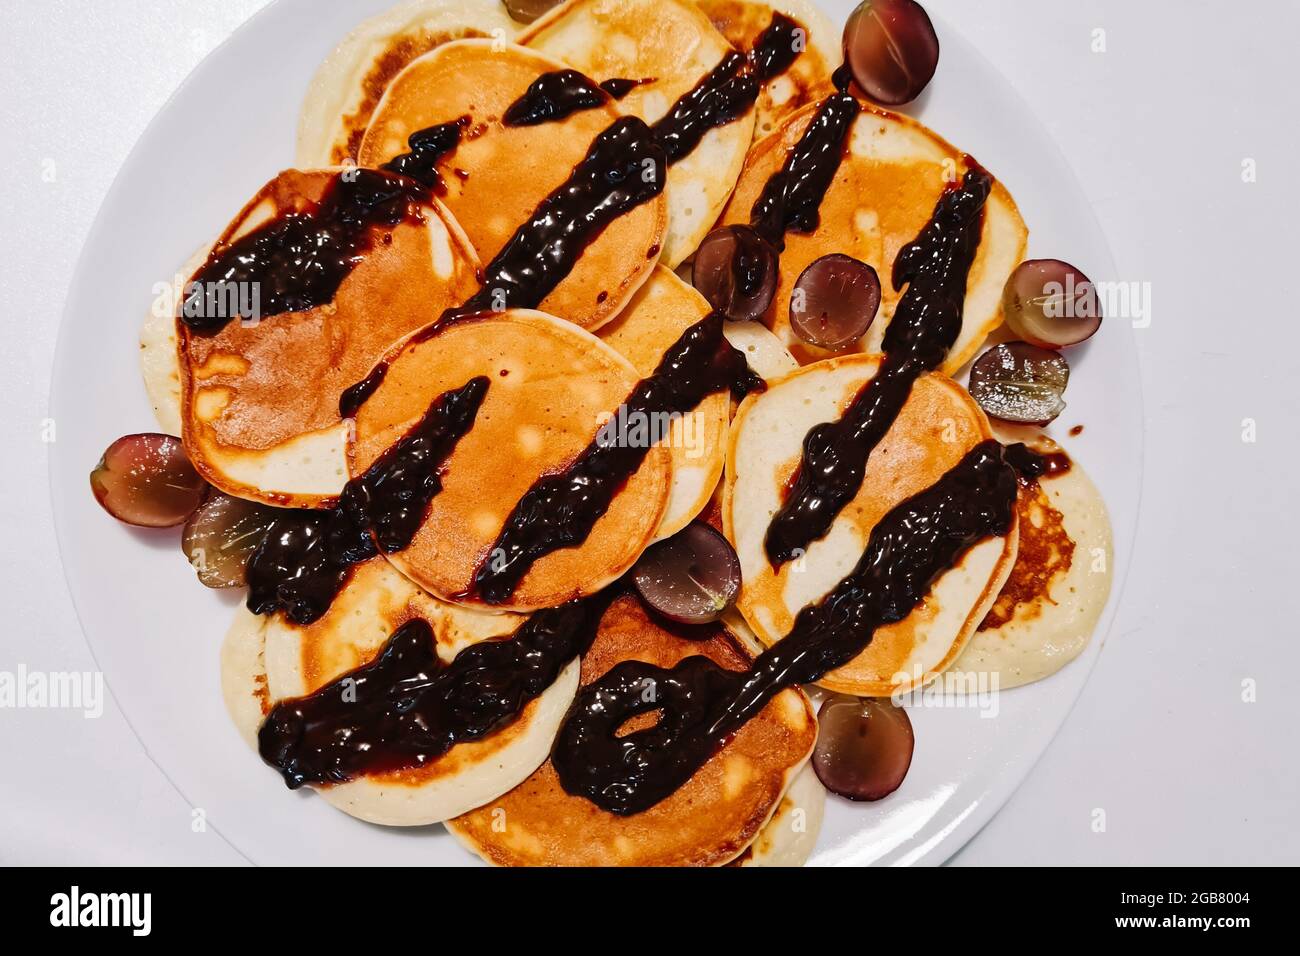 Homemade gluten-free pancakes with chocolate sauce on a white plate. Stock Photo